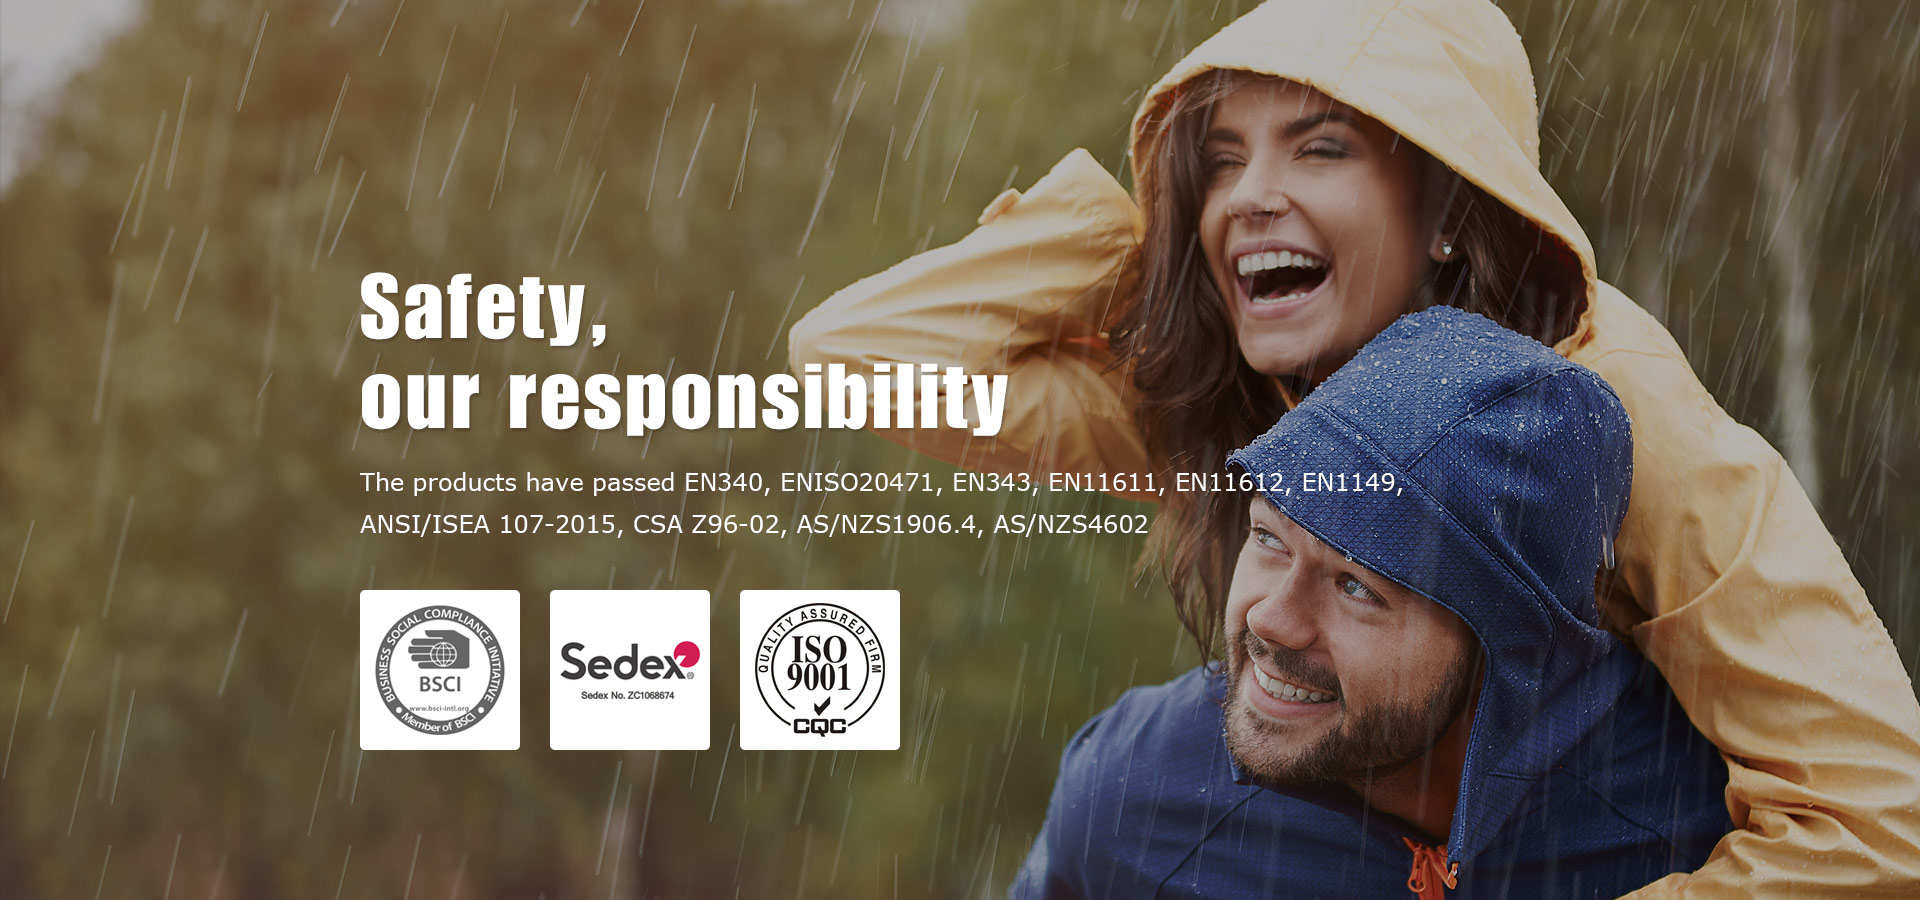 Safety,our responsibility